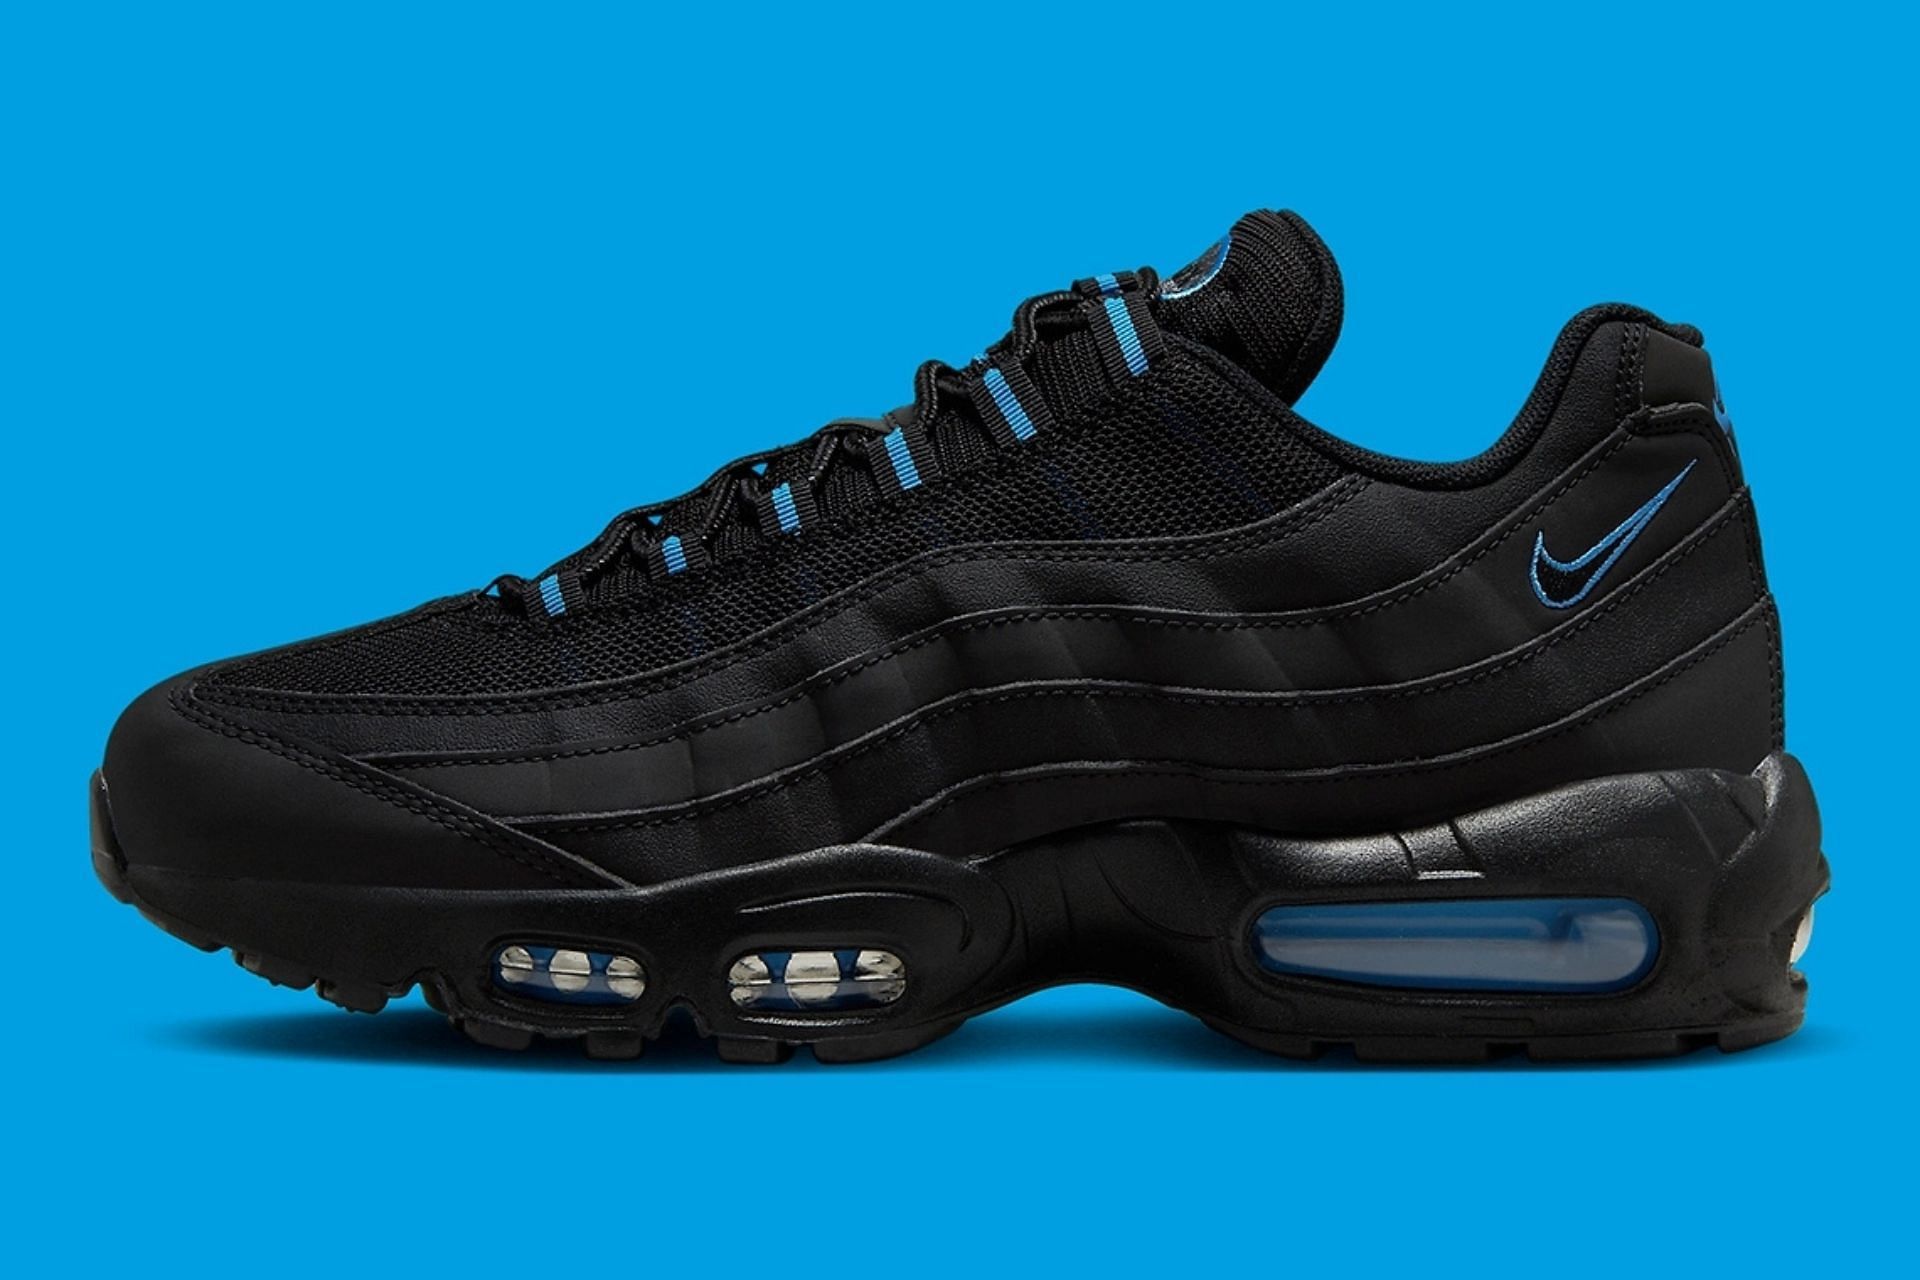 Sustancialmente empezar Glamour Air Max 1: Nike Air Max 95 "Black/University Blue" shoes: Where to buy,  price, and more details explored